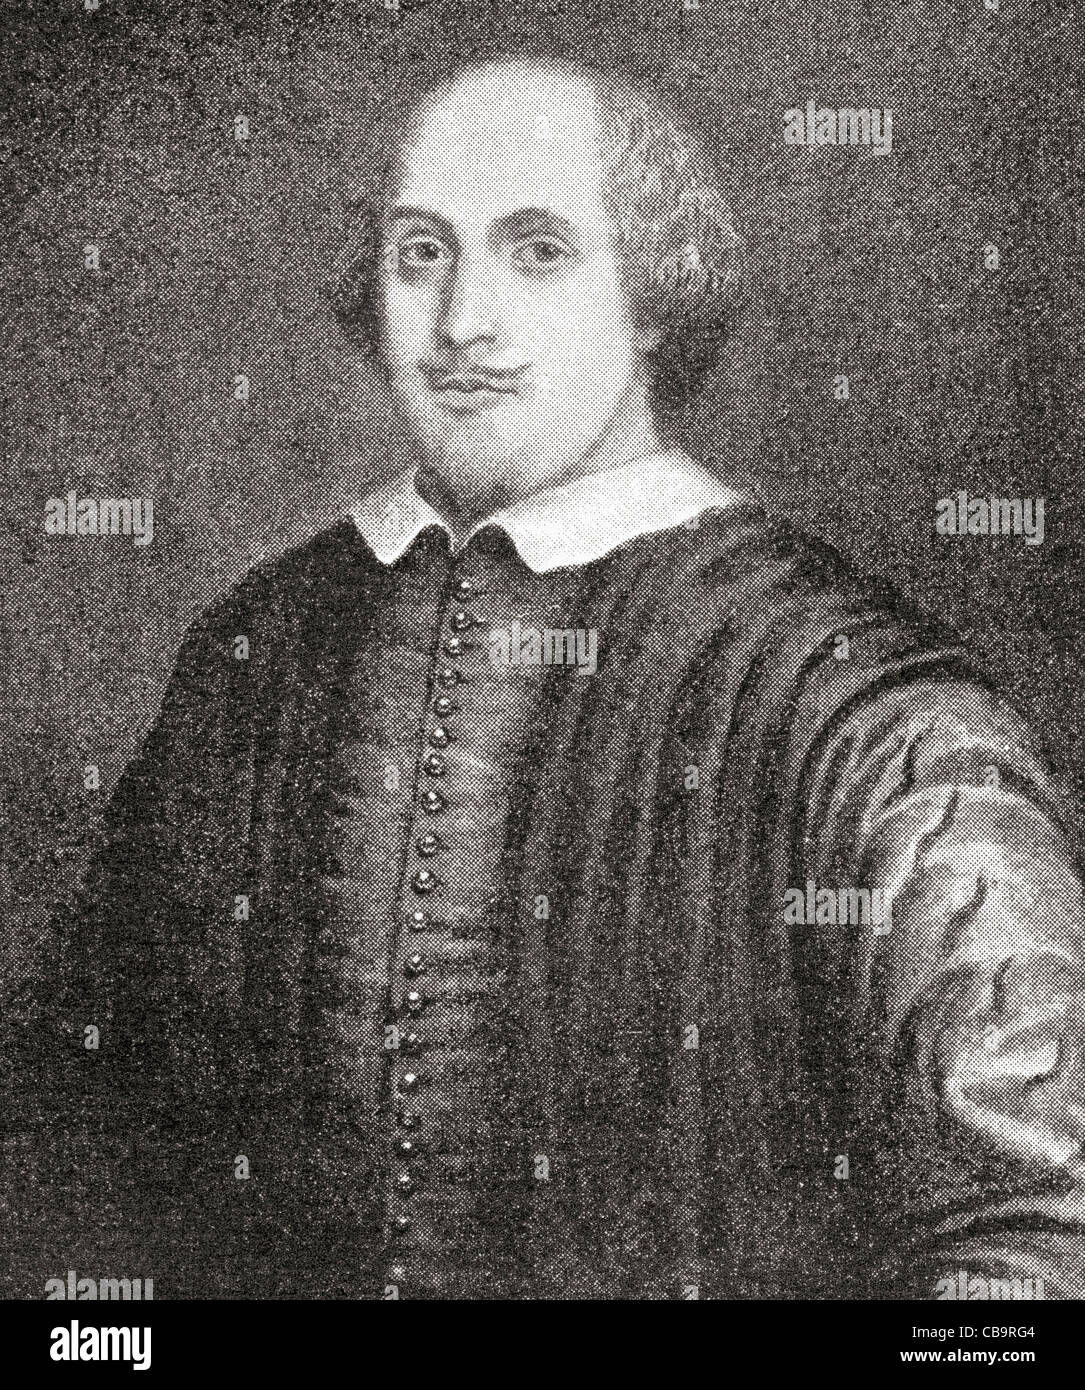 William Shakespeare, 1564 - 1616. English poet and playwright. Known as The Stratford Portrait. Stock Photo